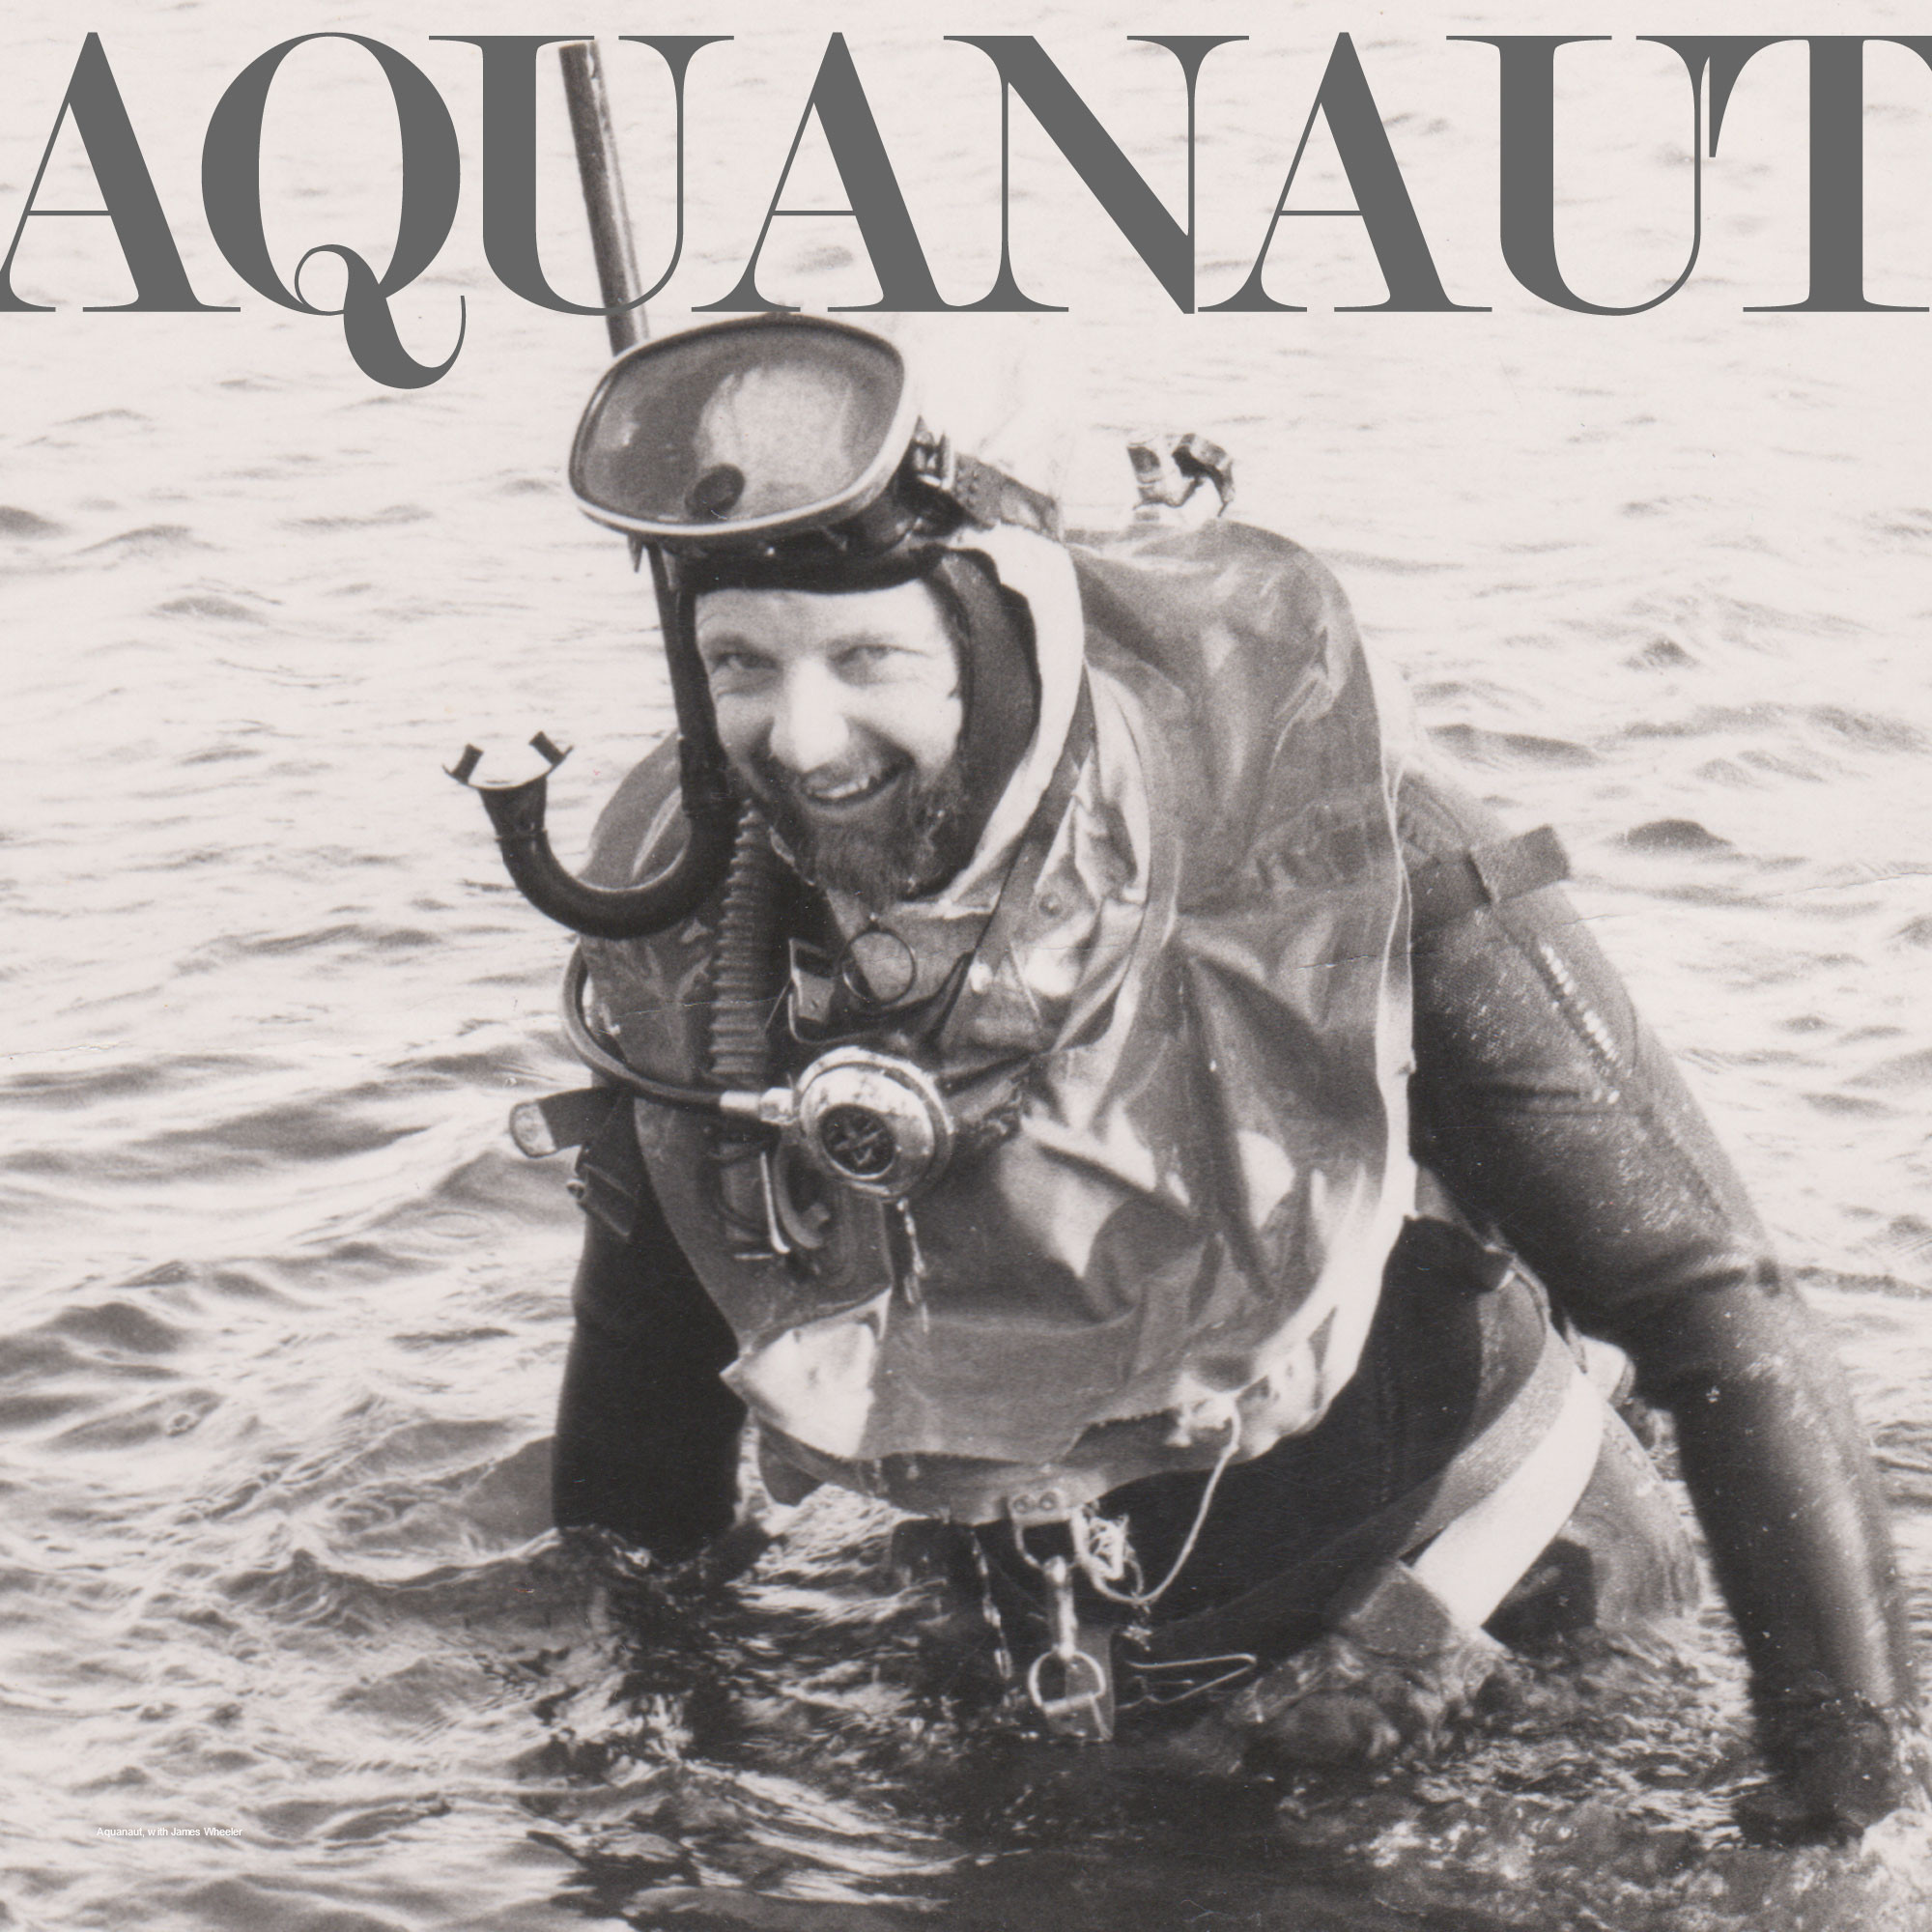 cover art for Aquanaut - Episode 7: Discovering unexplored shipwrecks with the Ferrograph echo sounder, and running out of air, 100’ below.